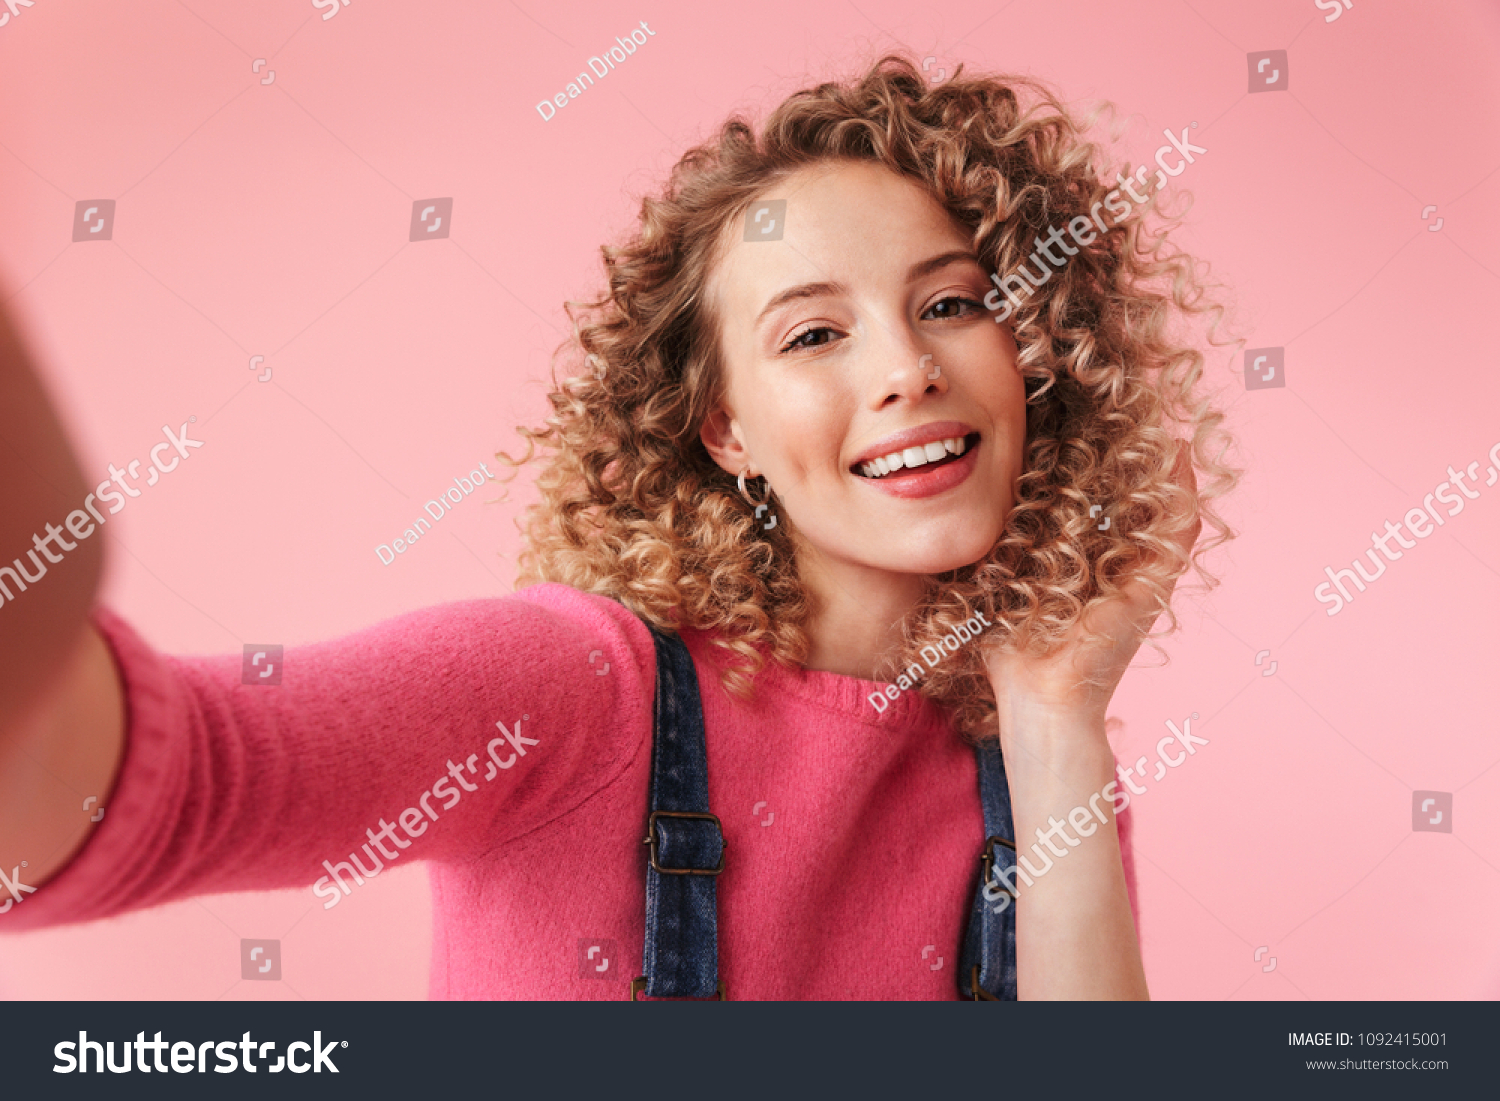 Portrait of happy young girl with curly hair taking a selfie isolated over pink background #1092415001